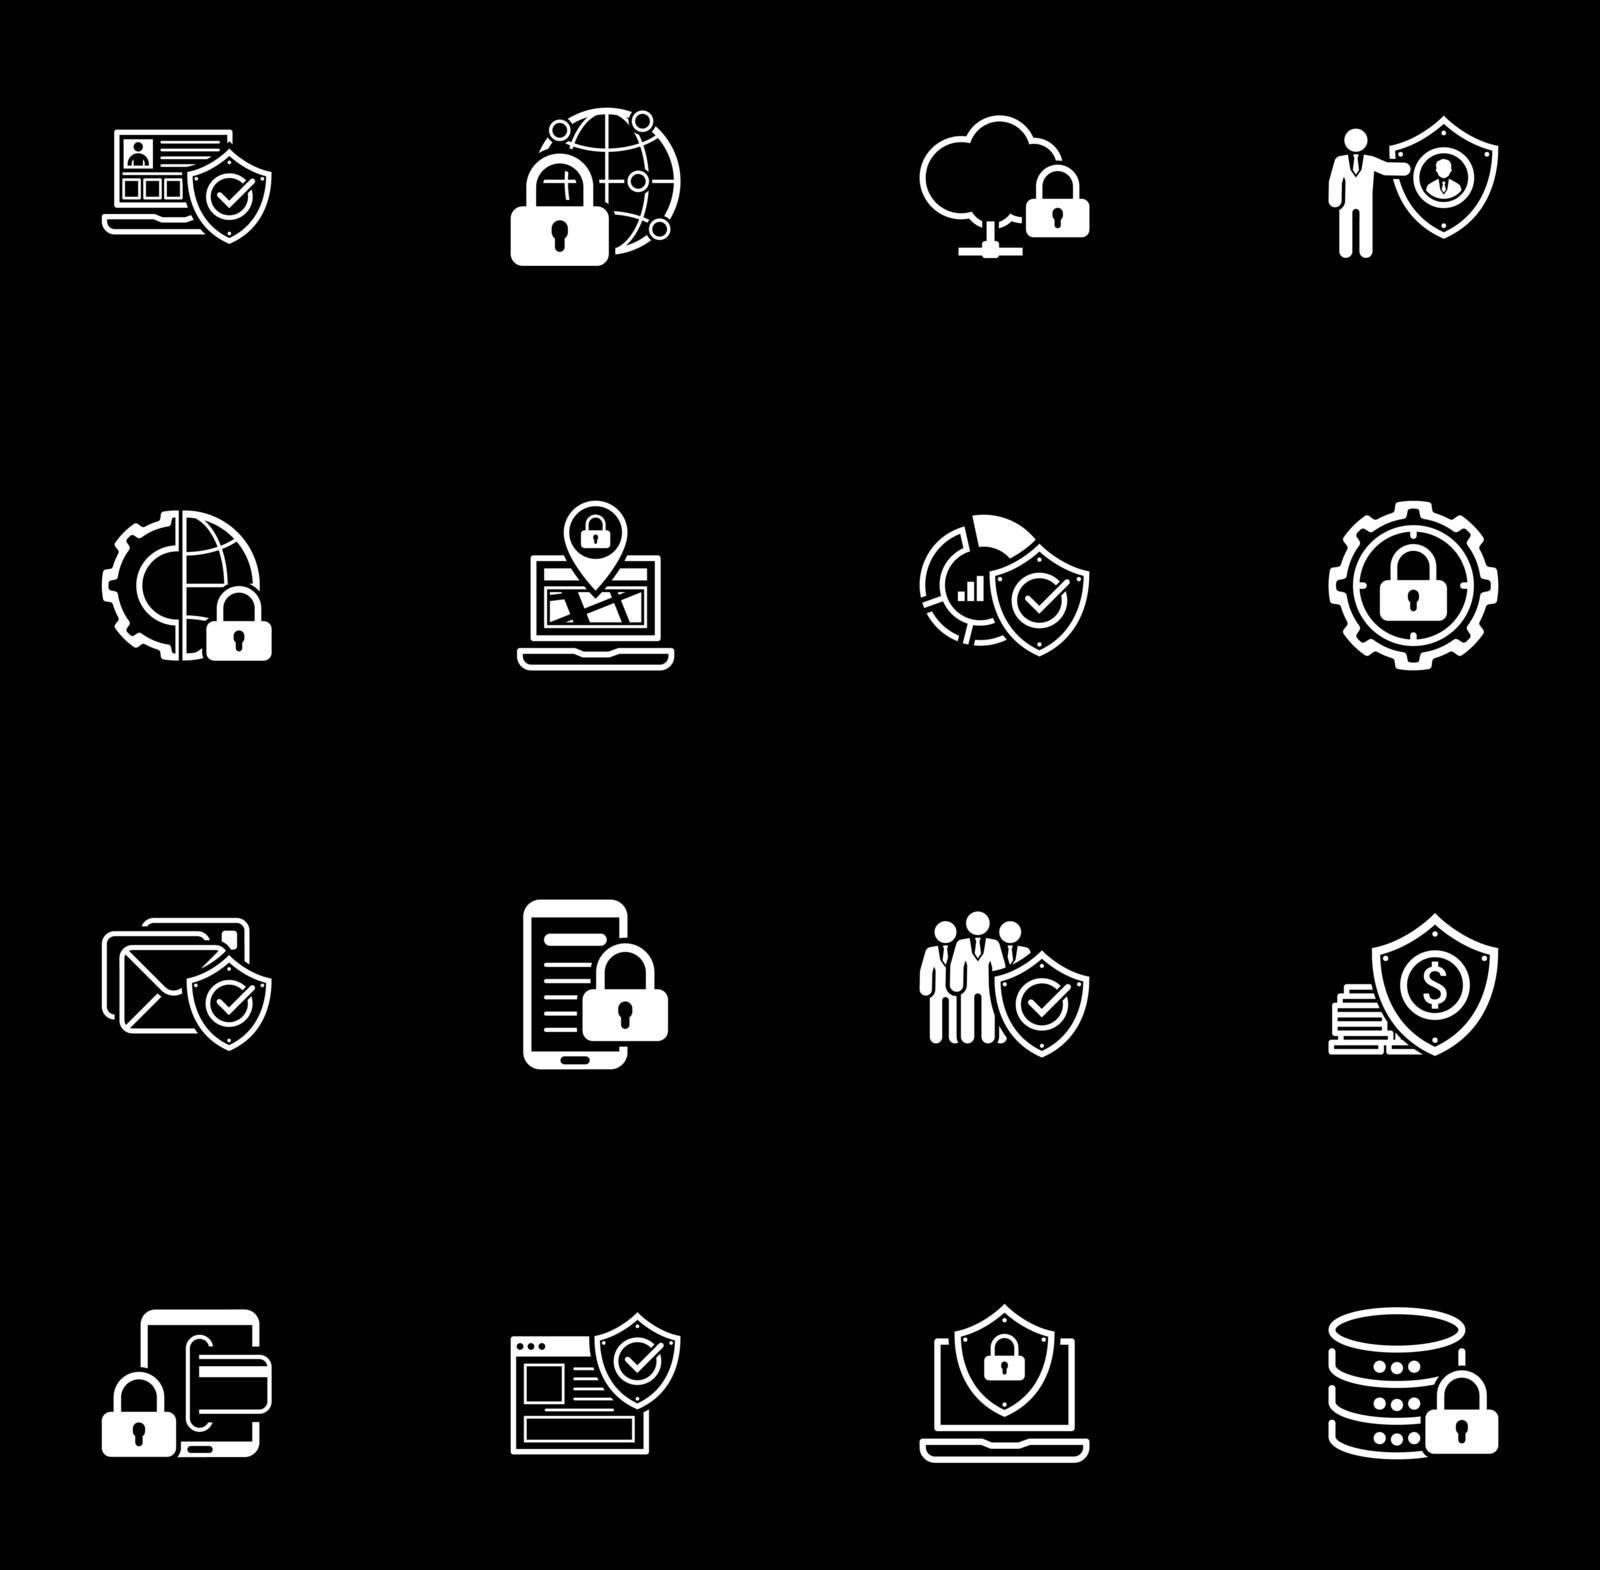 Flat Design Protection and Security Icons Set. by WaD